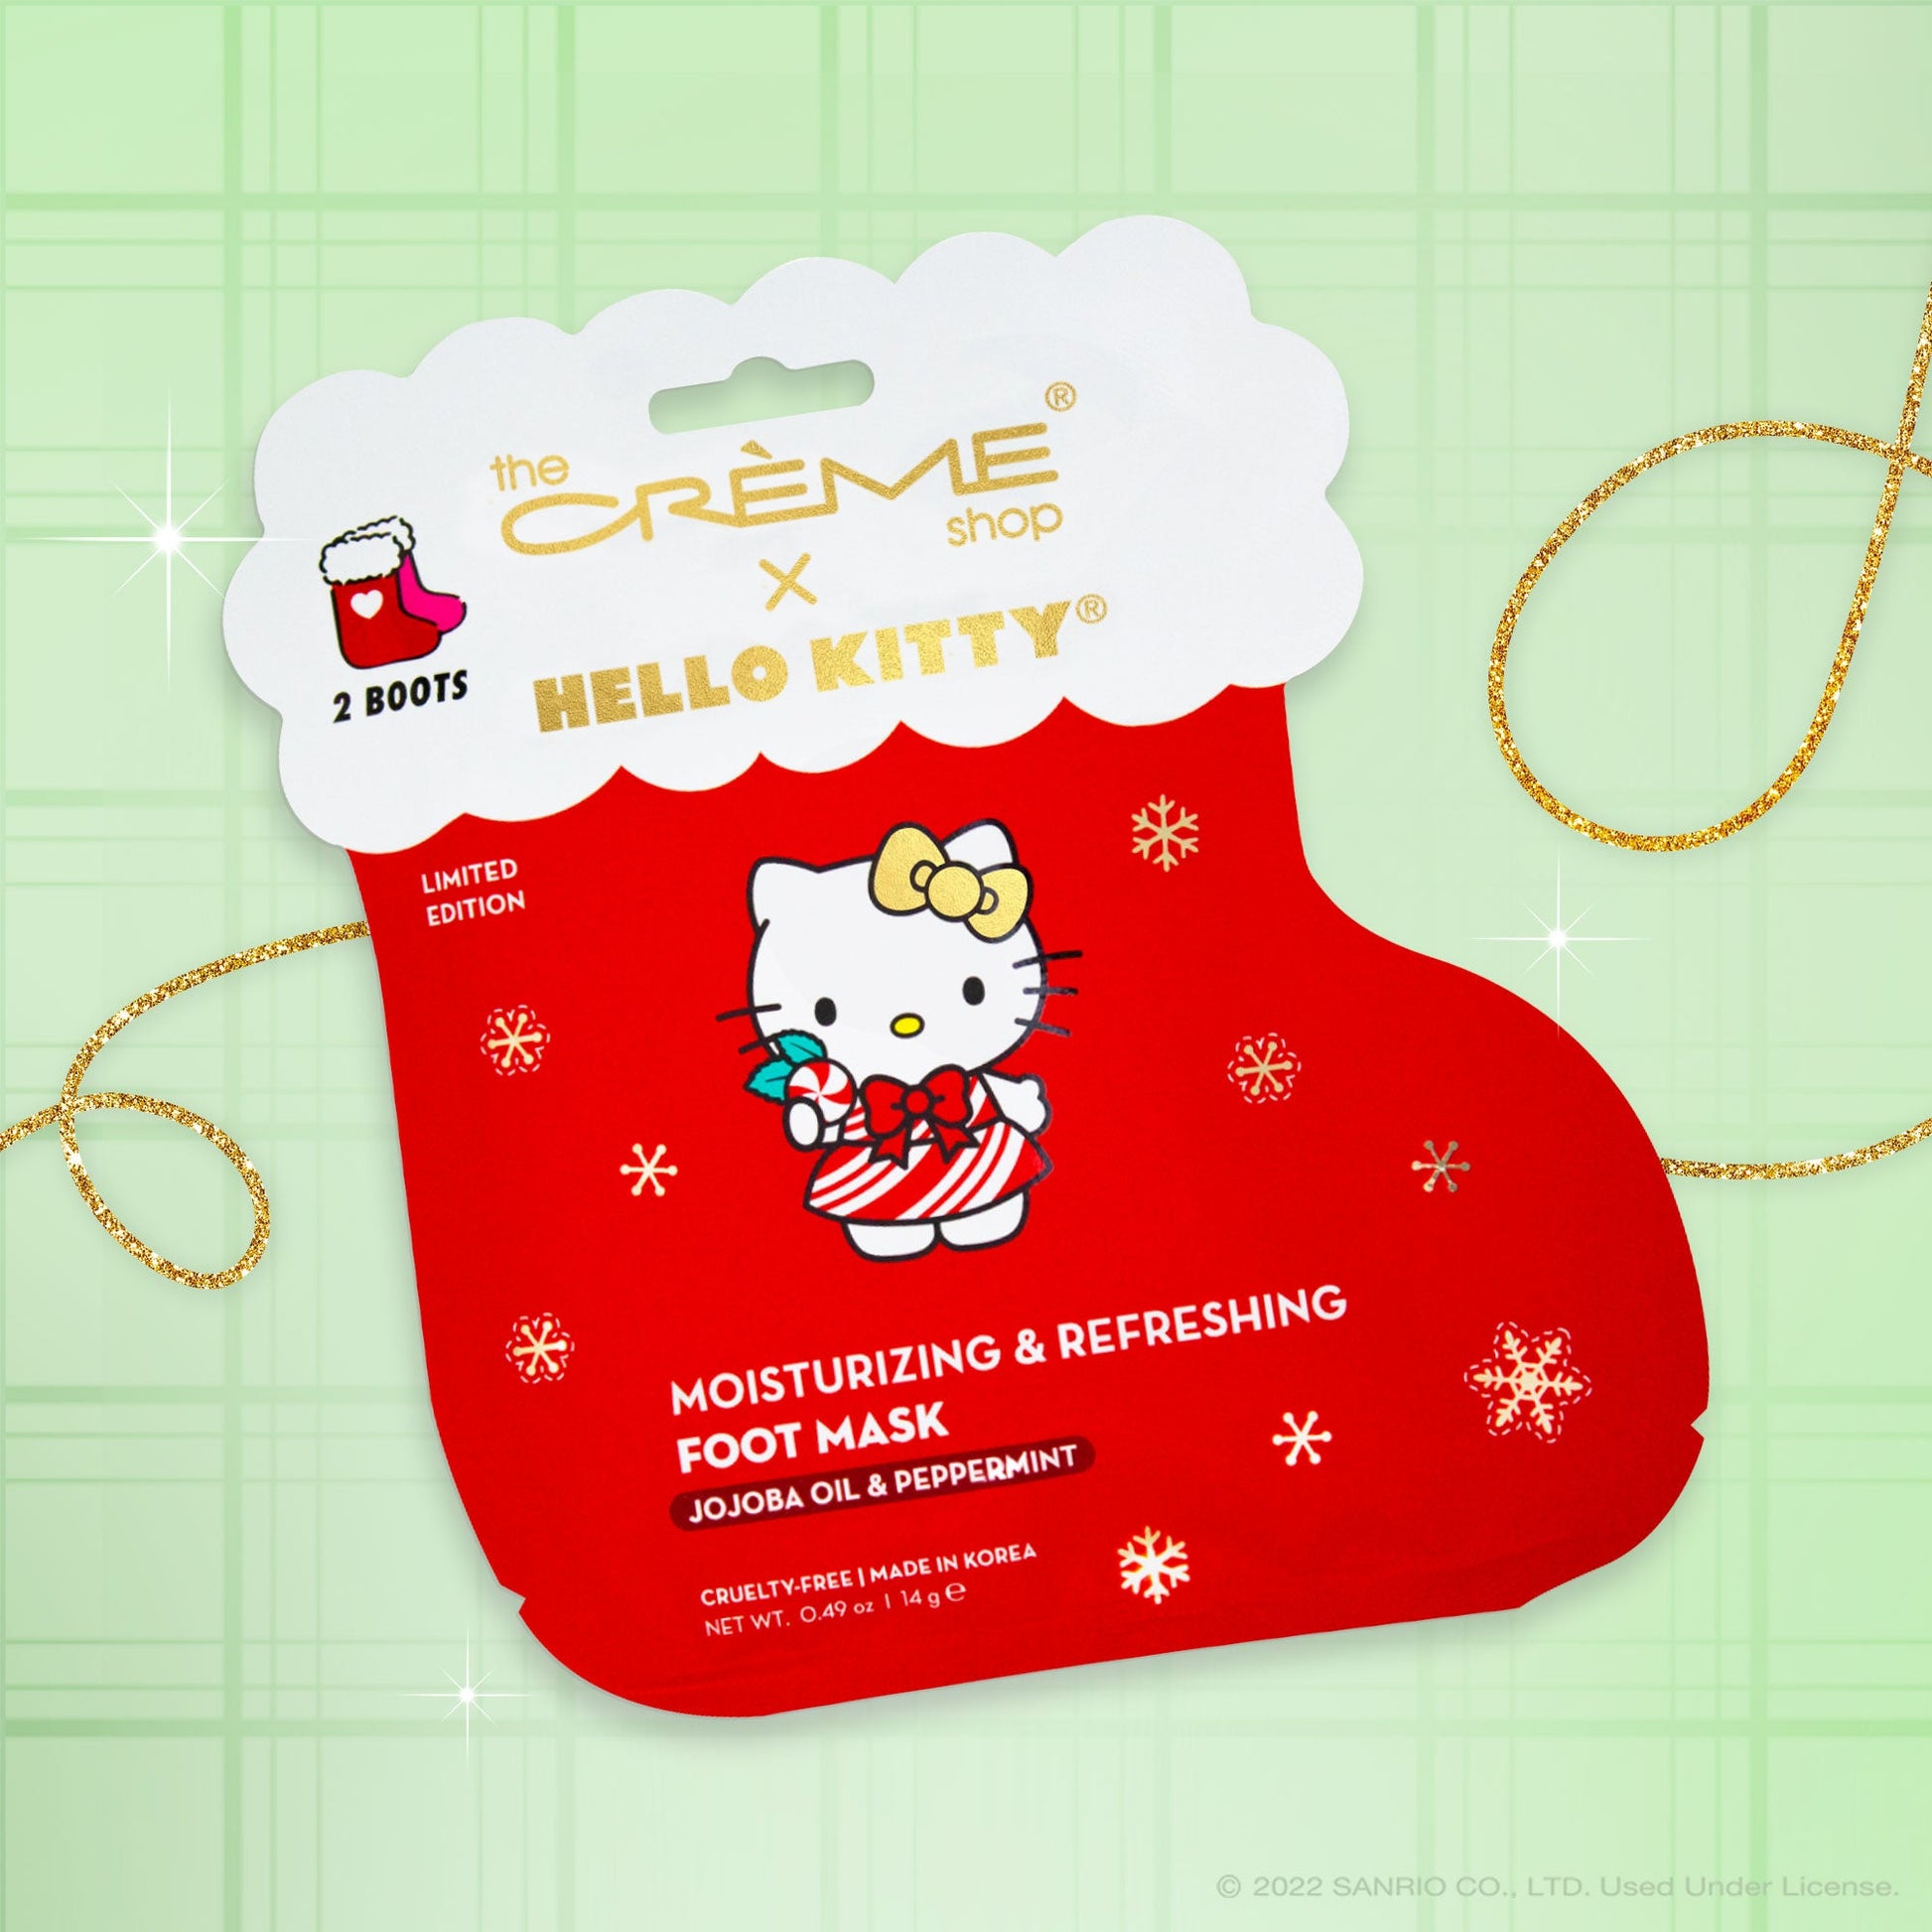 Hello Kitty Minty Fresh Soles Foot Mask (Set of 3) Foot Masks - The Crème Shop x Sanrio 